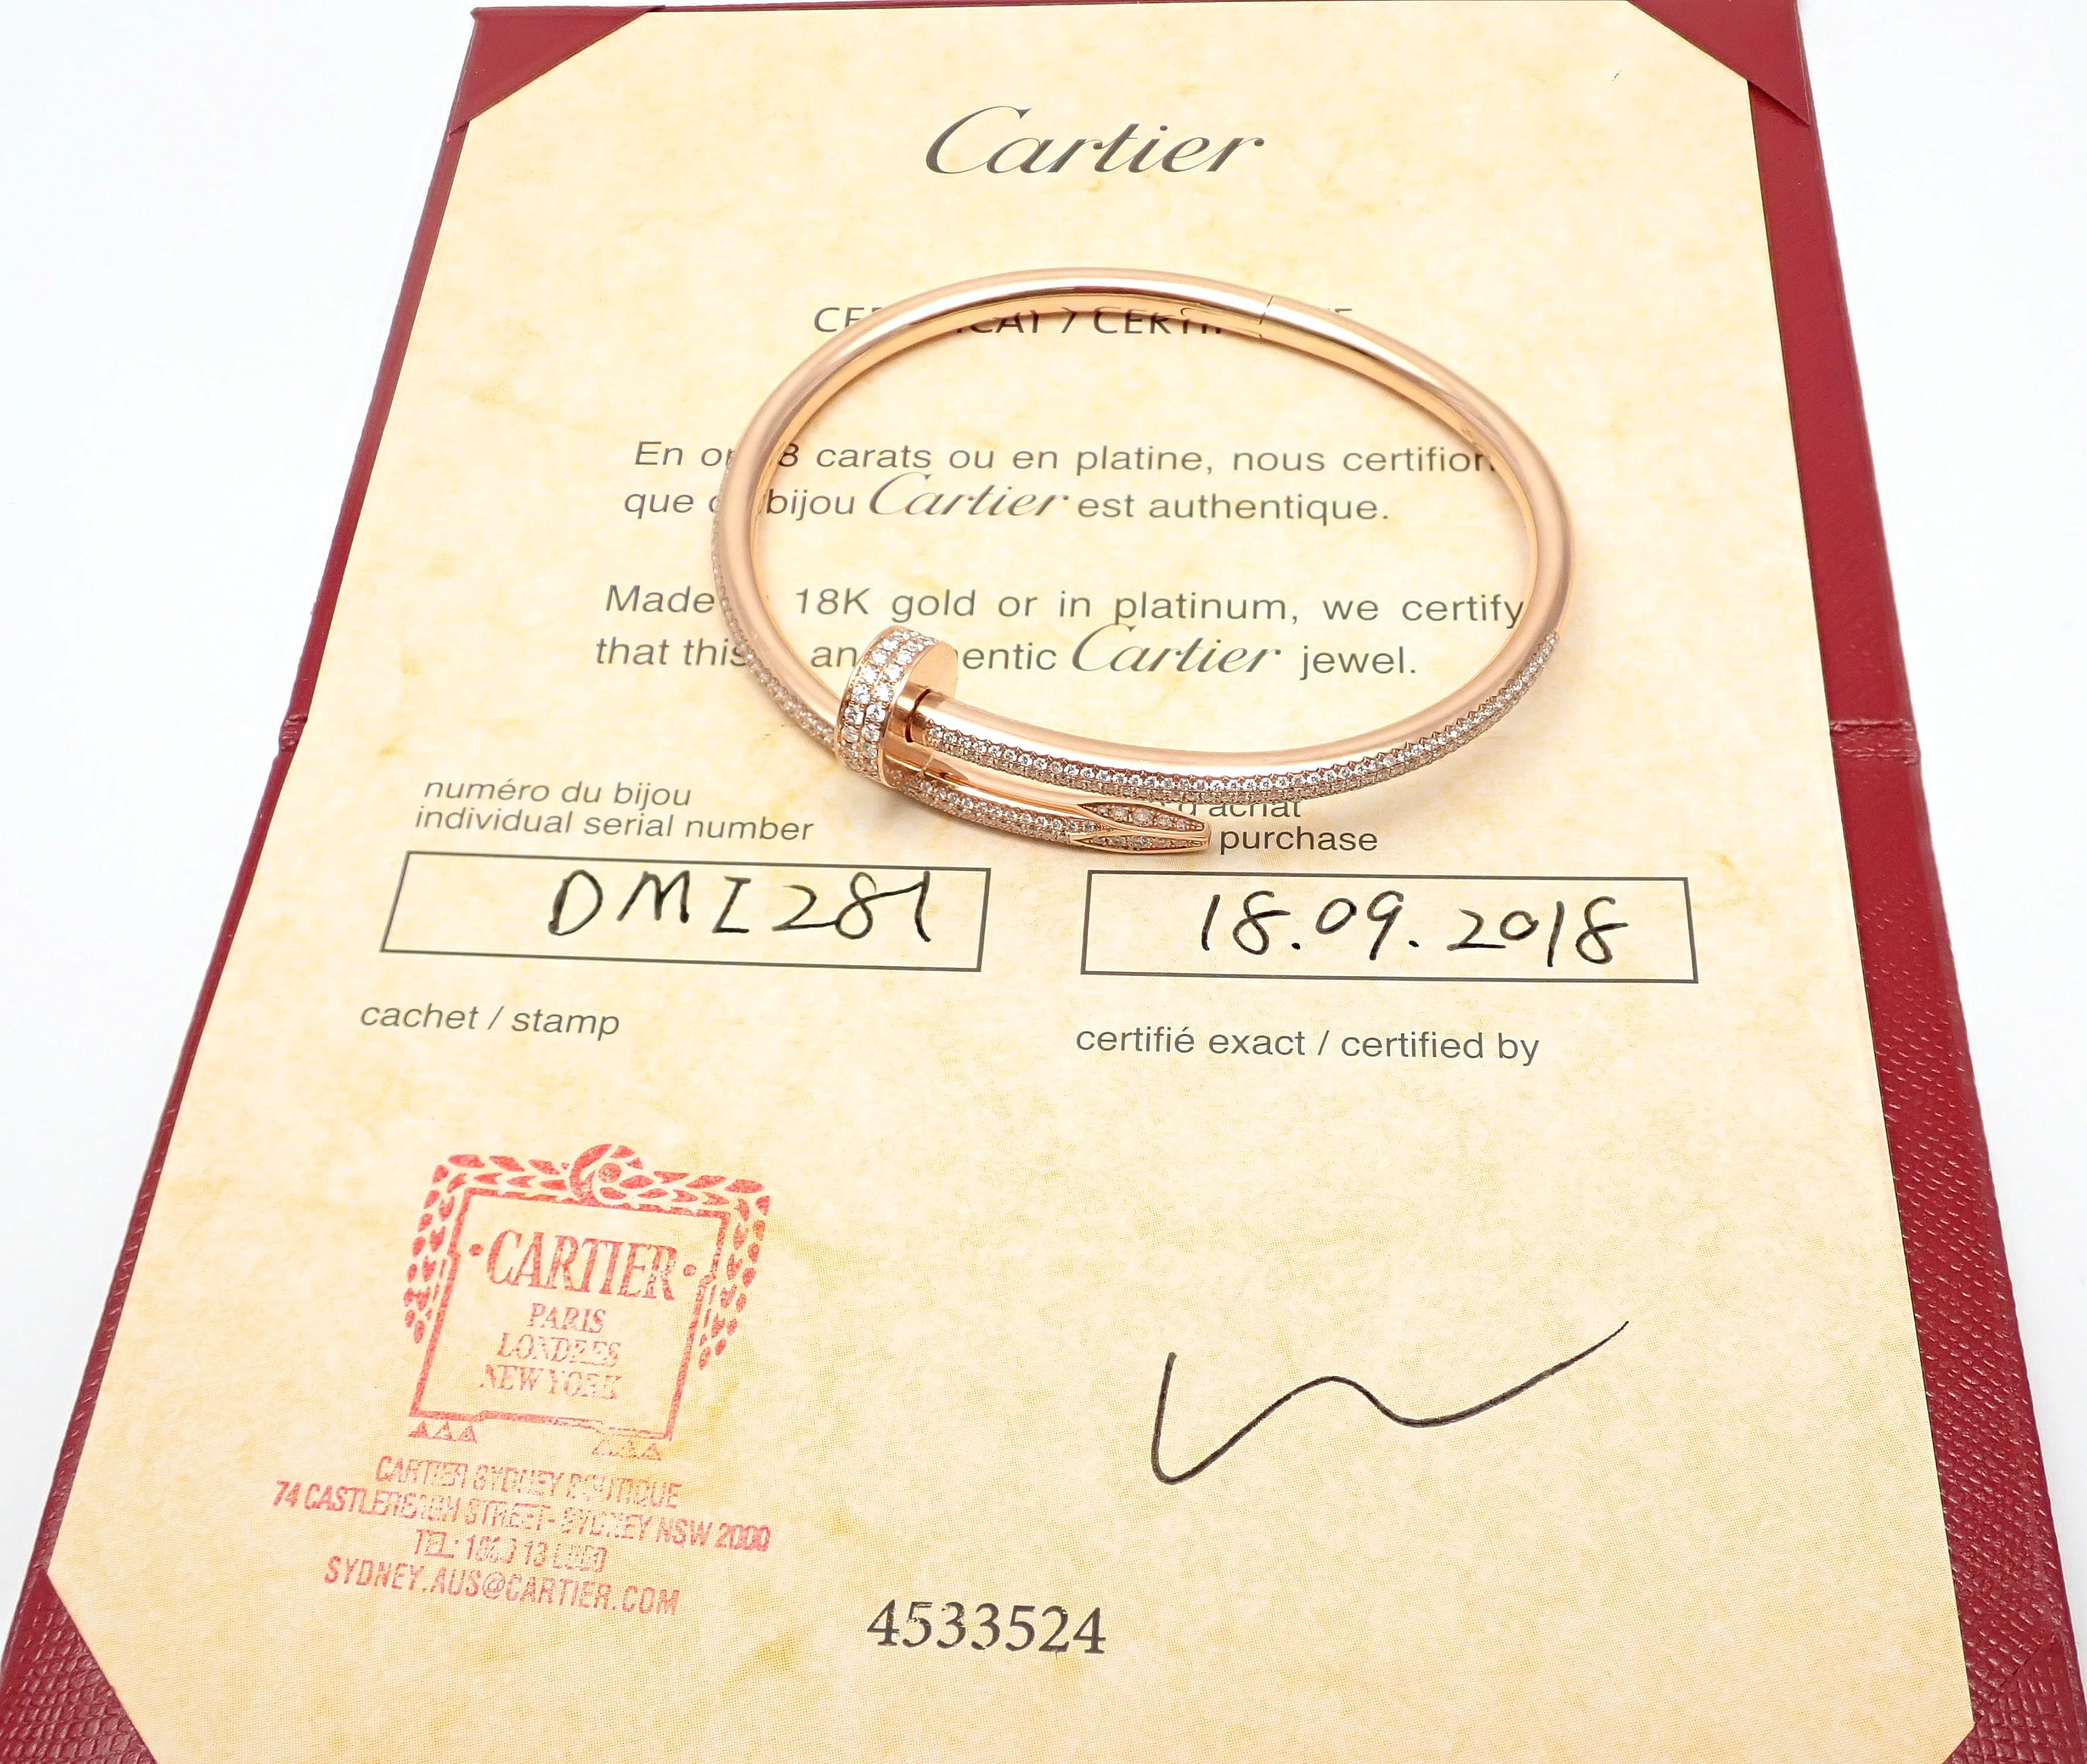 18k Rose Gold 2.26ct Diamond Juste Un Clou Nail Bangle Bracelet Size 17 by CARTIER. 
This bracelet comes with a Cartier certificate of authenticity and Cartier box.
Retail Price: $43,600
Details:
Size: 17
Weight:  33.9 grams
Width:  15mm
Stamped